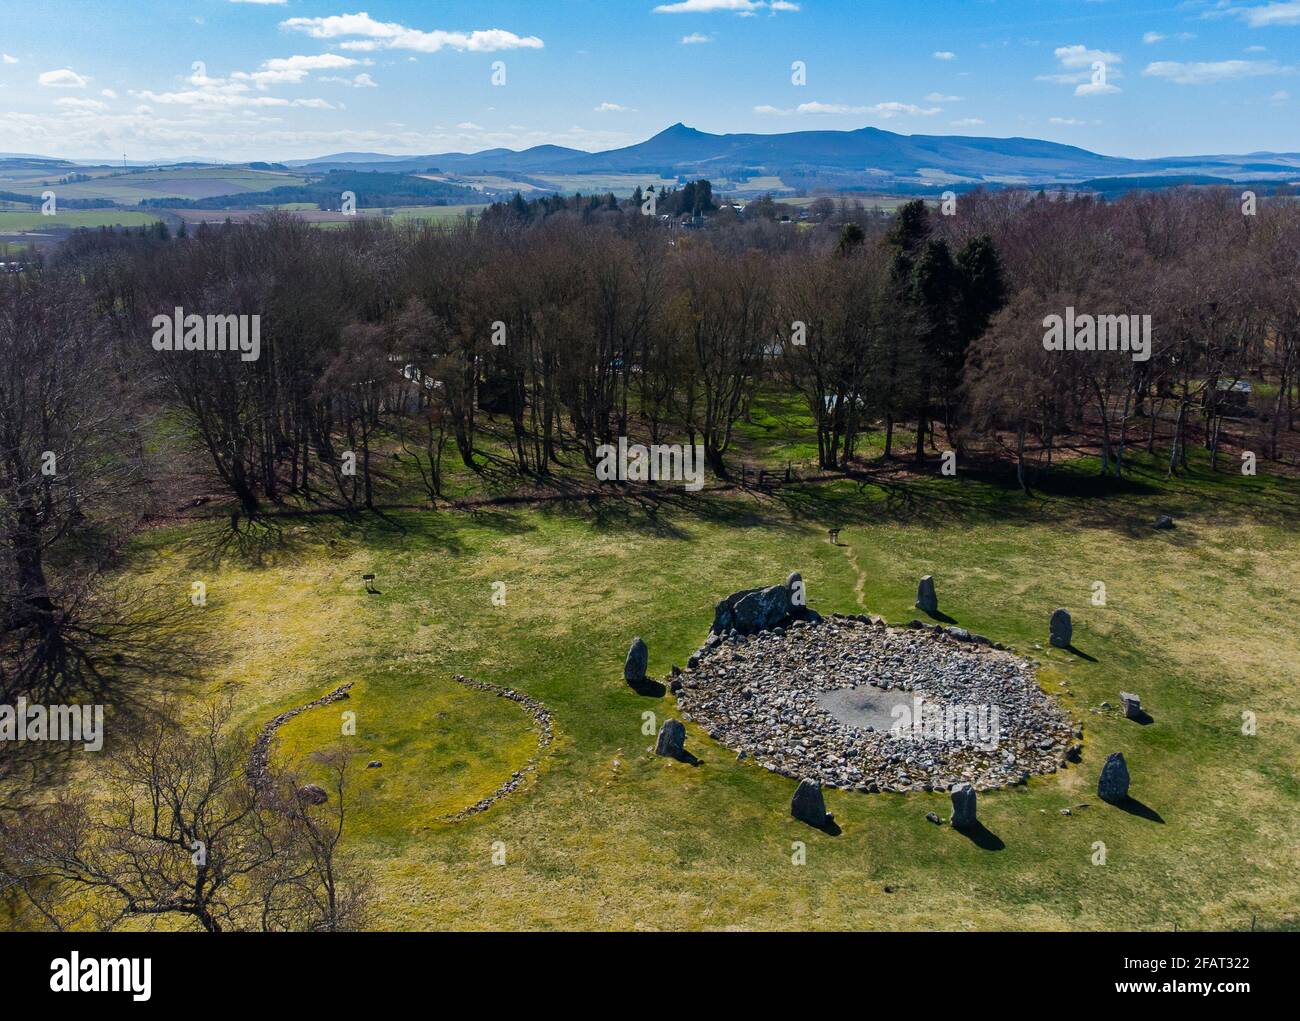 Loanhead of Daviot recumbent stone circle, ancient Pictish standing stones in Aberdeenshire, Scotland, with the hill Bennachie in the background Stock Photo